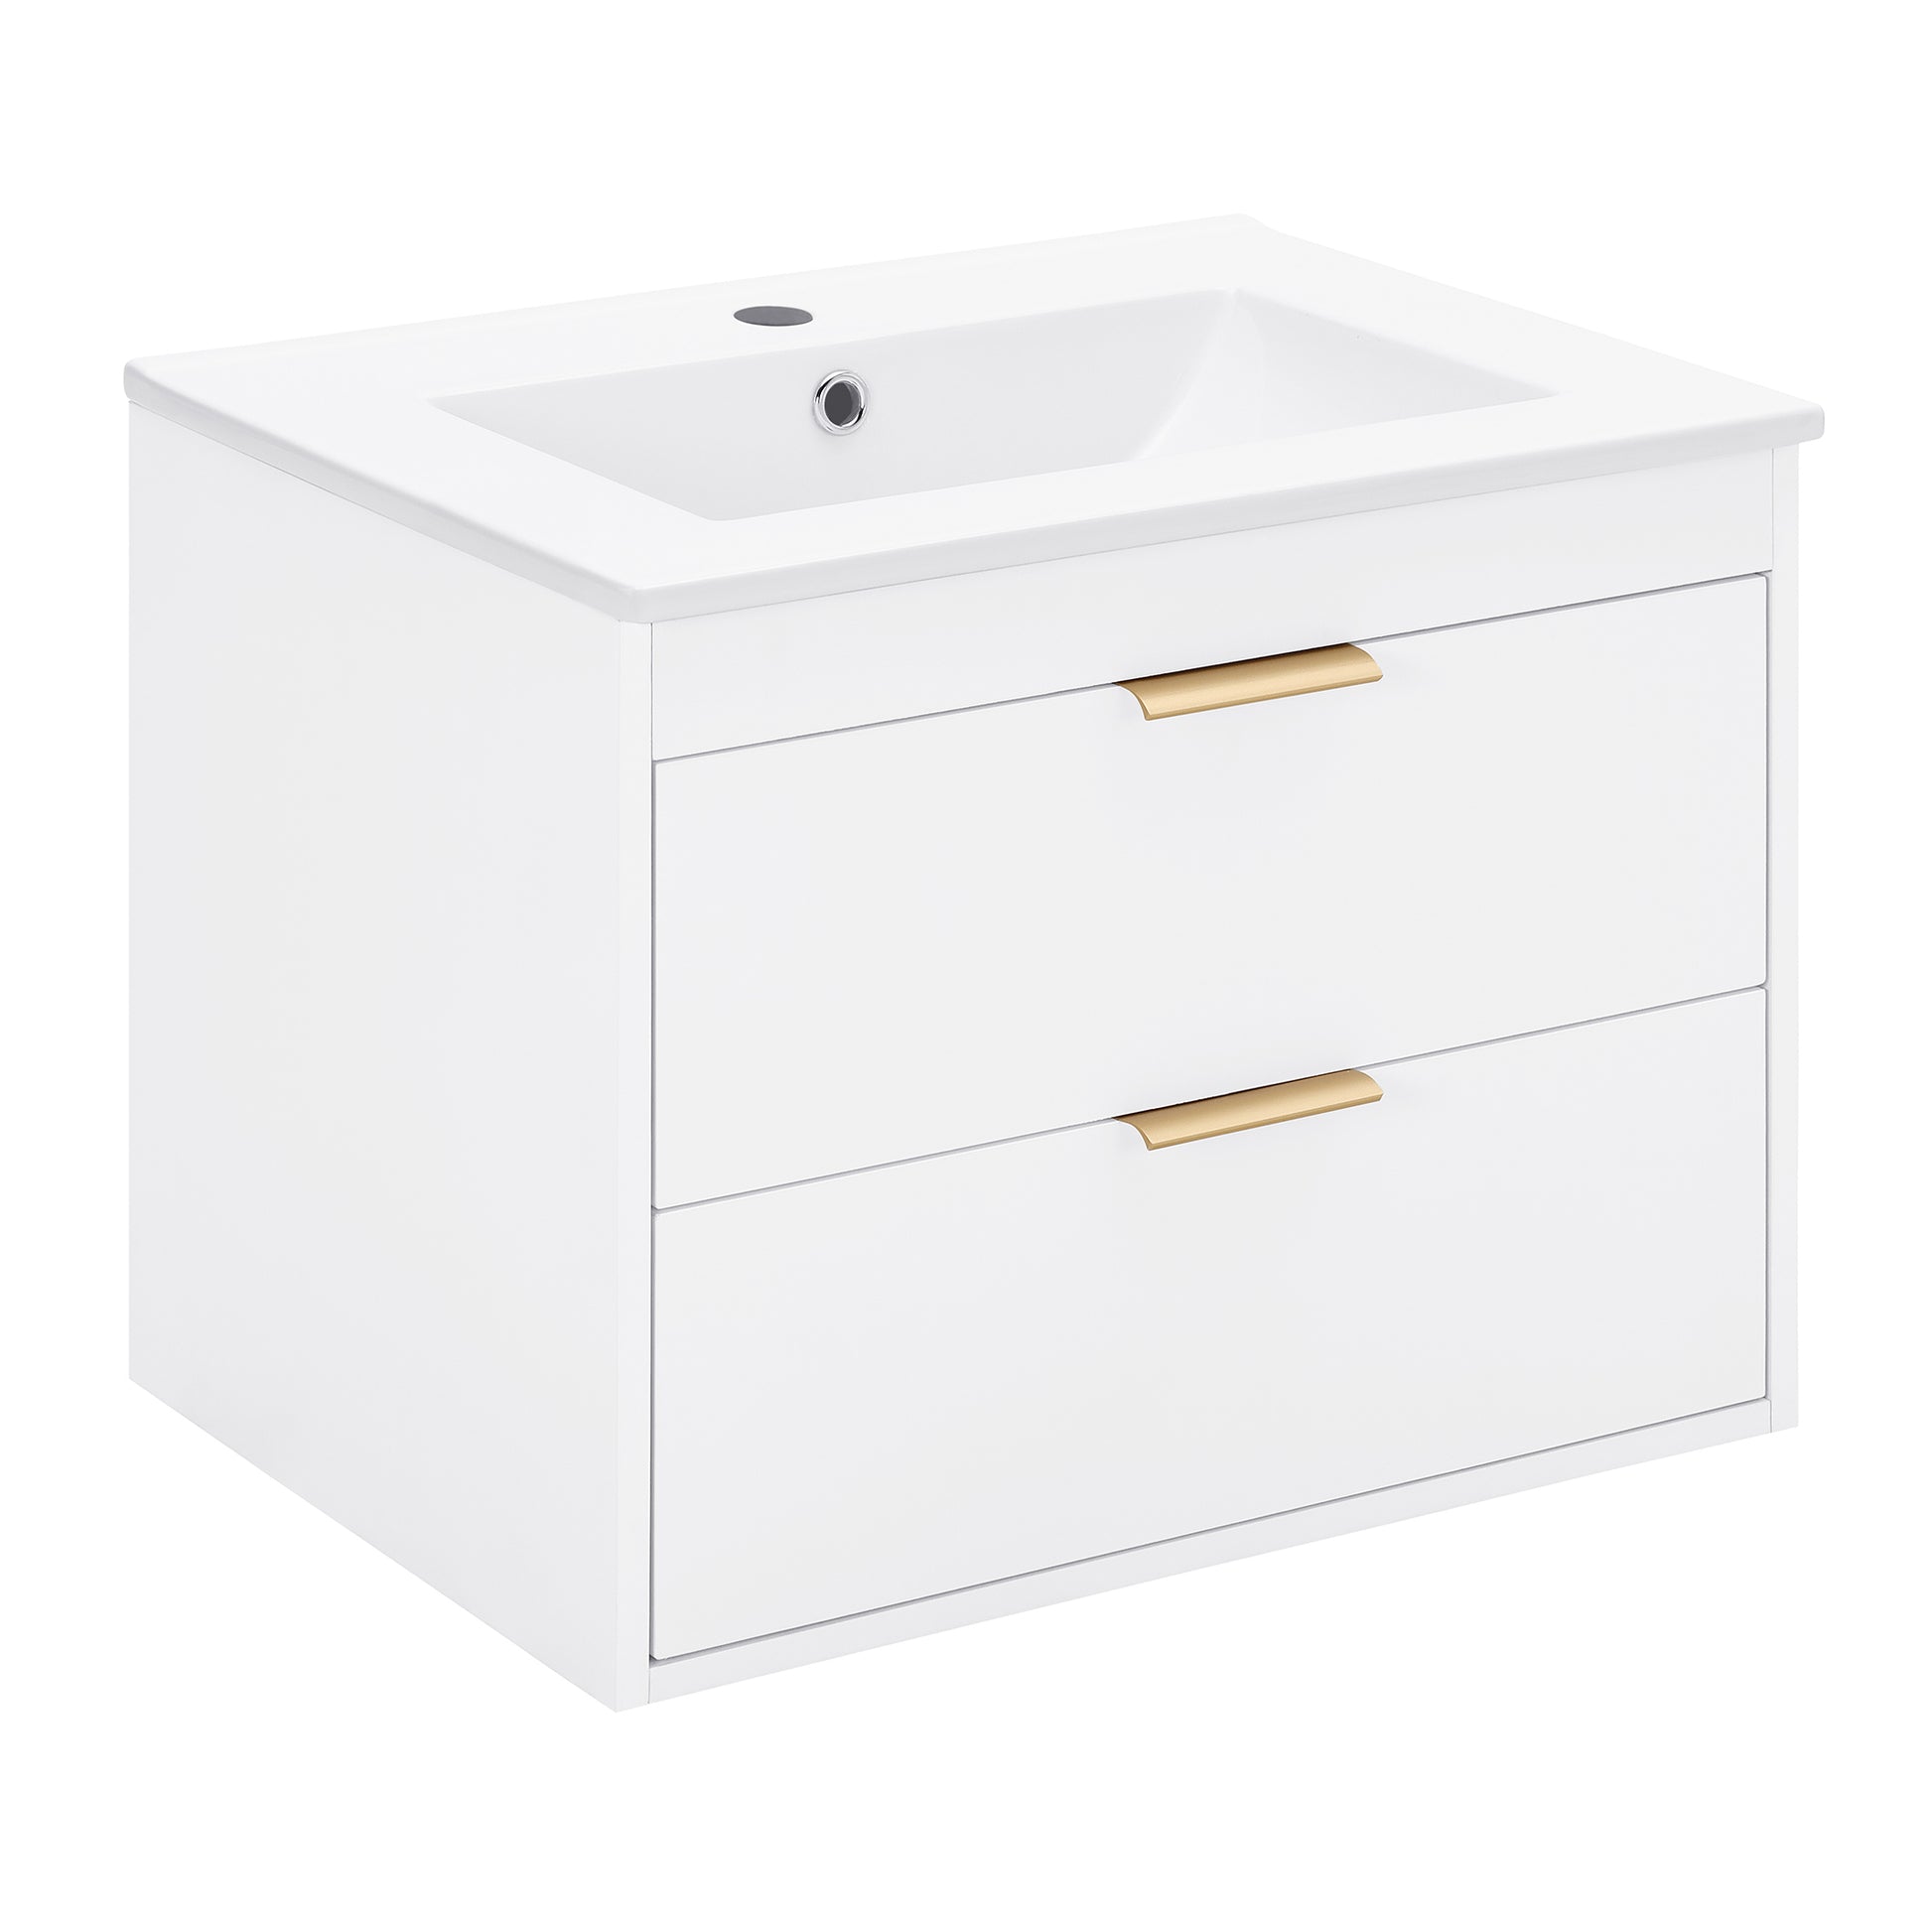 24" floating wall mounted bathroom vanity with white white-wall mounted-ceramic+mdf